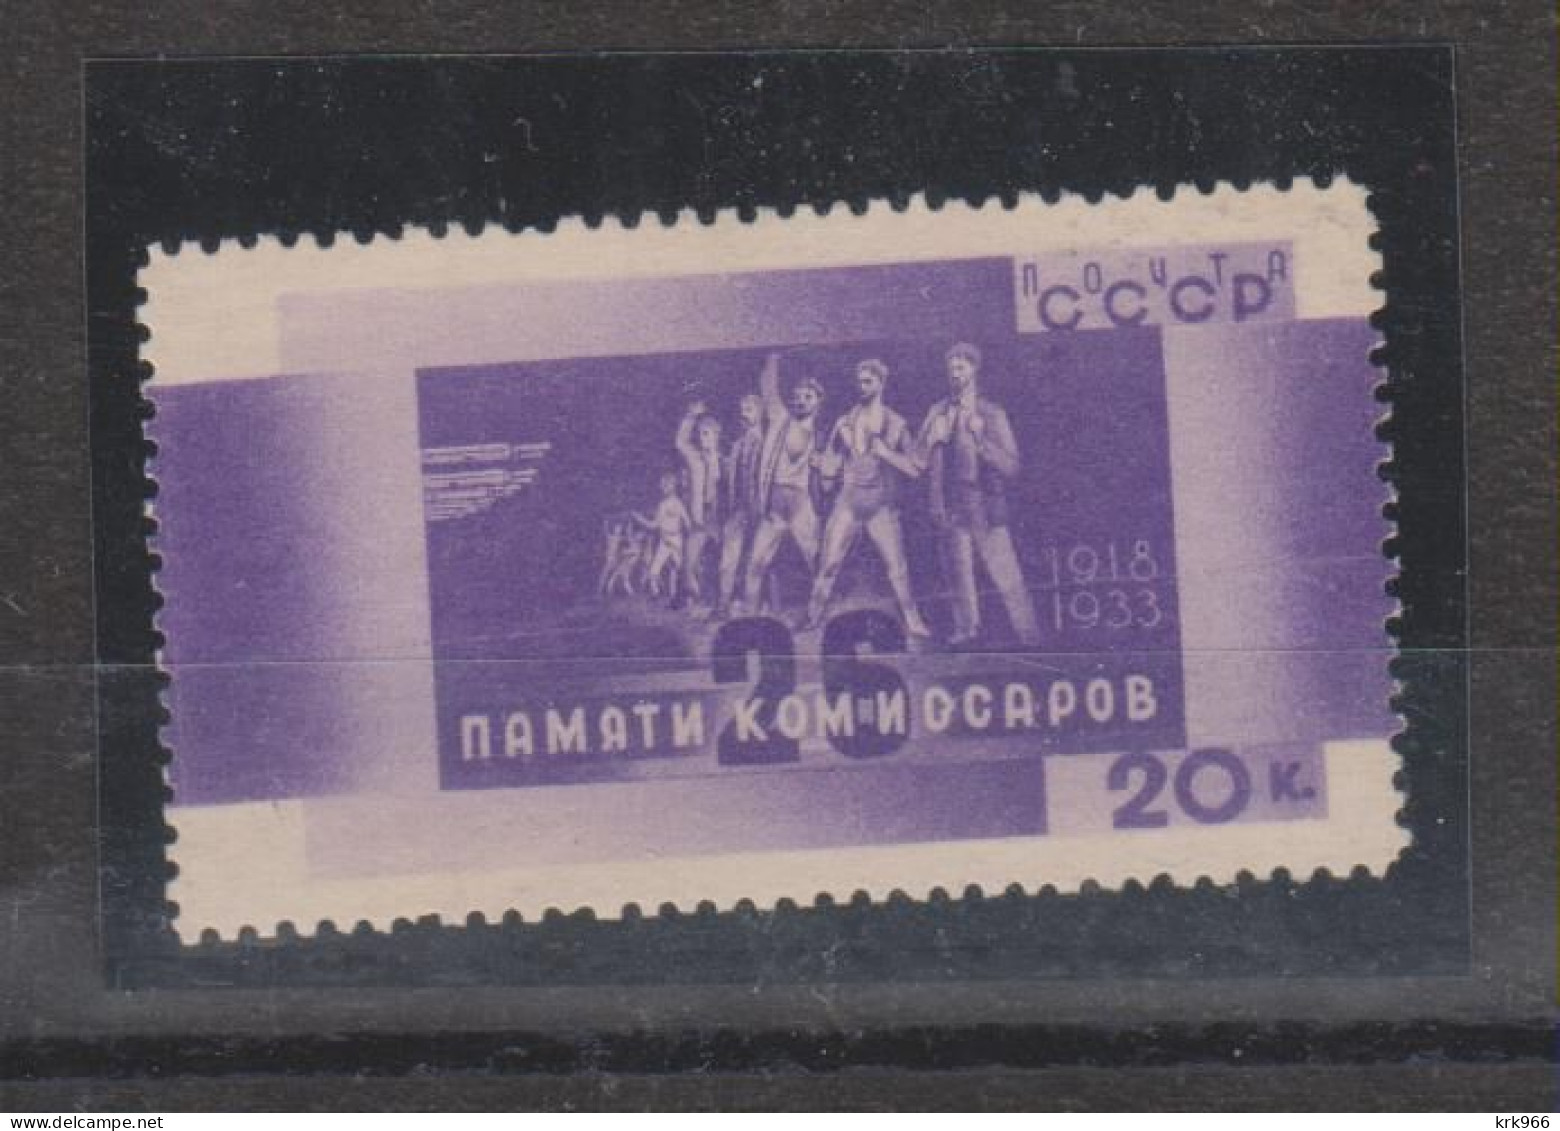 RUSSIA 1933 20 K Nice Stamp   MNH - Unused Stamps